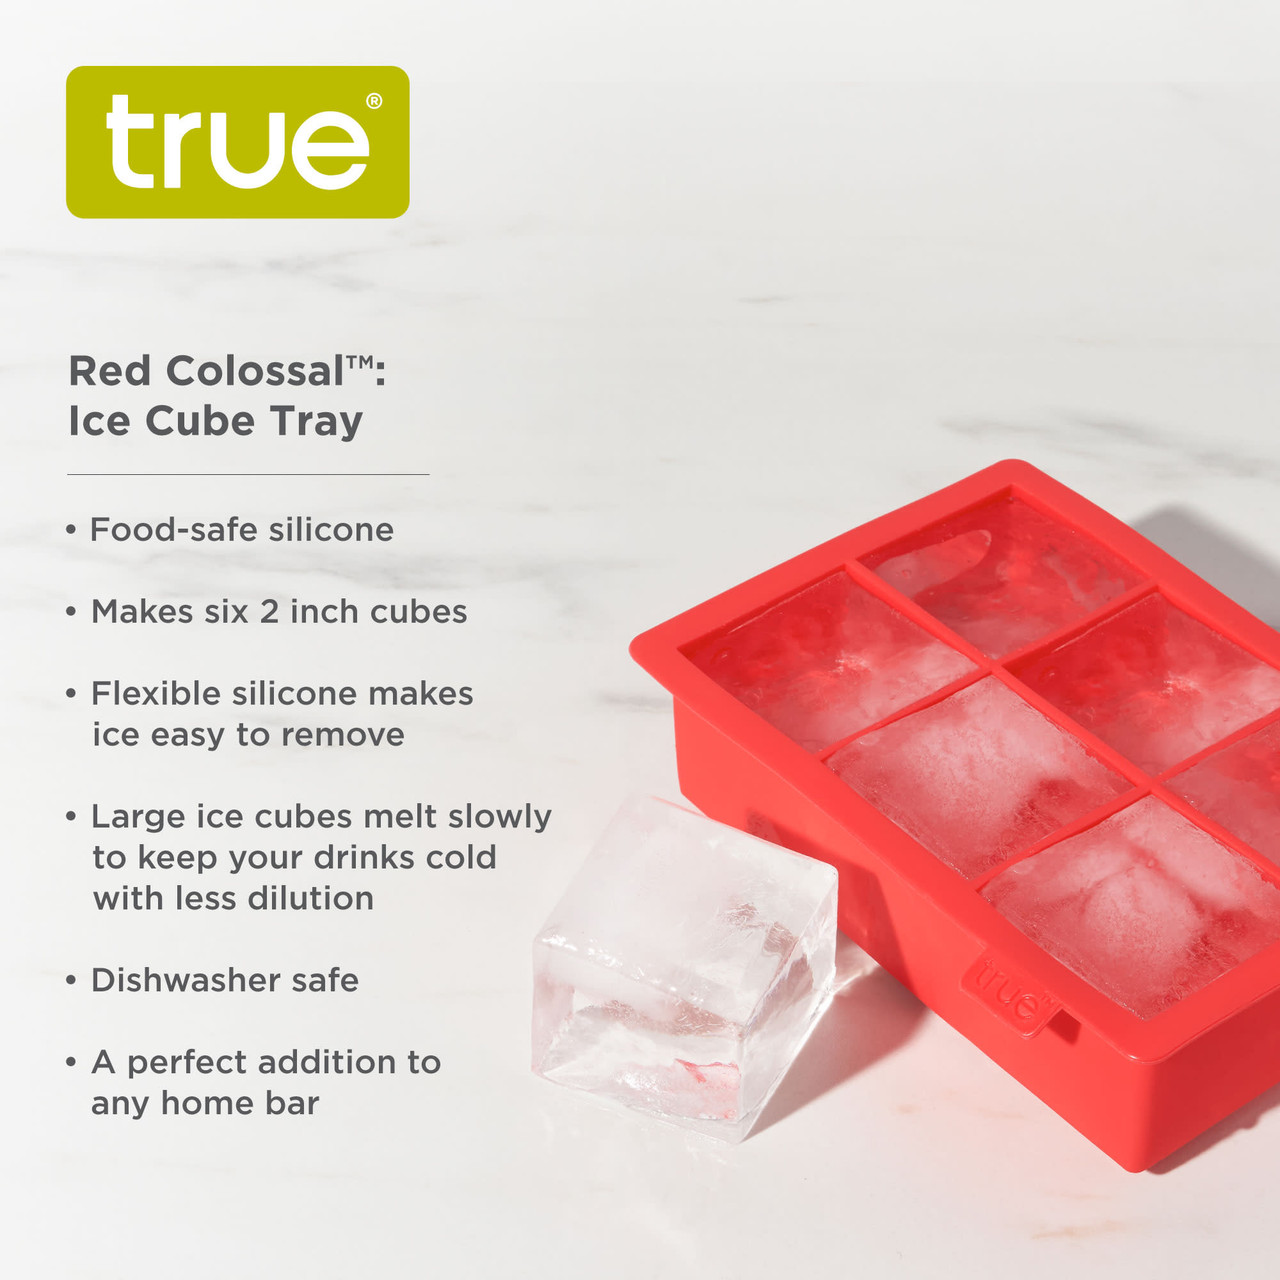 True Colossal Ice Cube Tray, Extra Large Ice Cubes, Dishwasher Safe  Flexible Silicone Ice Cube Tray, Makes 6 2 Inch Ice Cubes, Grey, Set of 1, Barware & Accessories